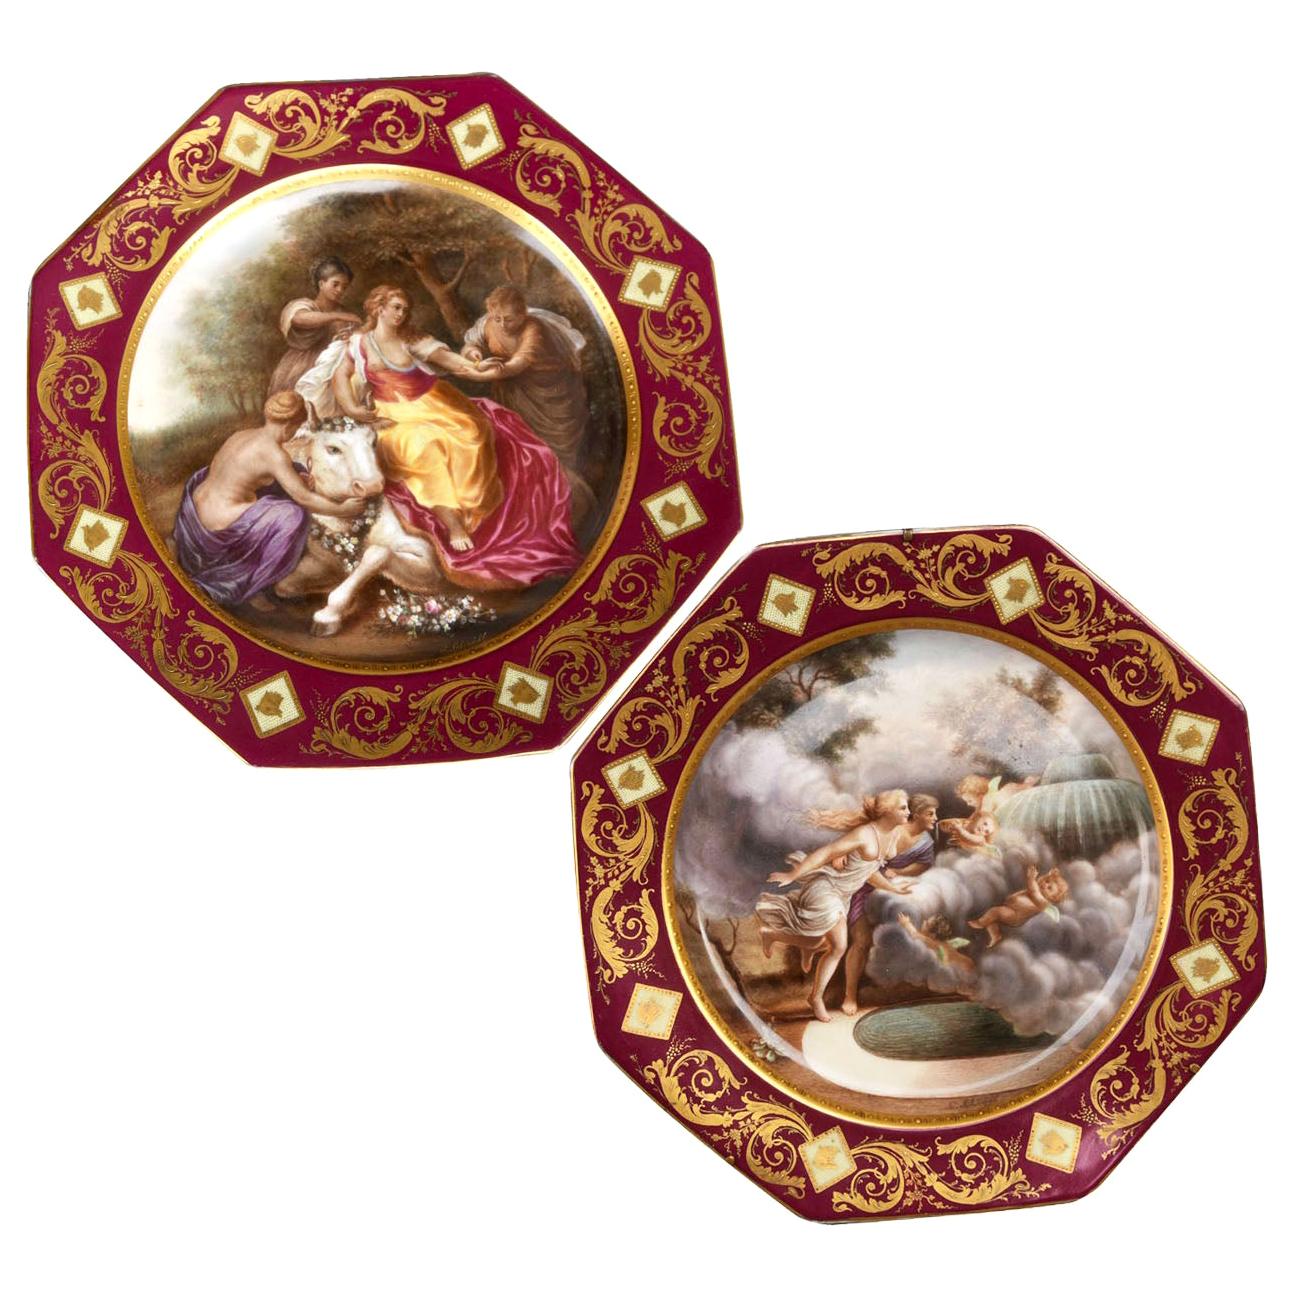 Pair of Porcelain Plates From Vienna